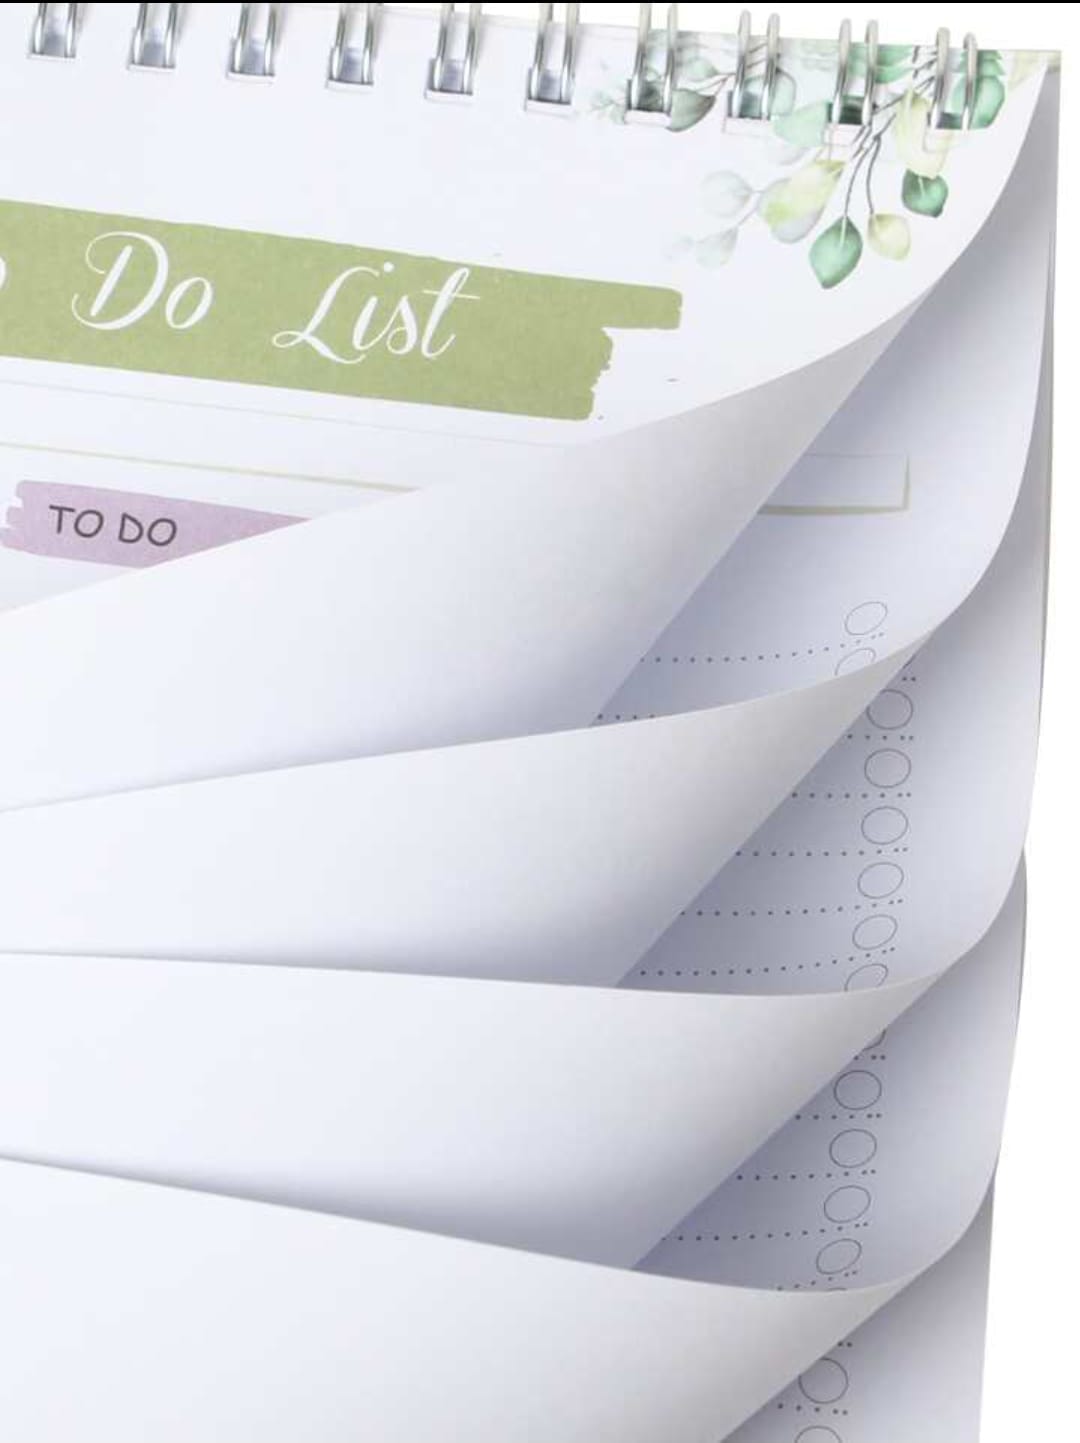 Inkarto WeeklyWise: Your Organized Life Planner I  Pack of  50 Sheets I